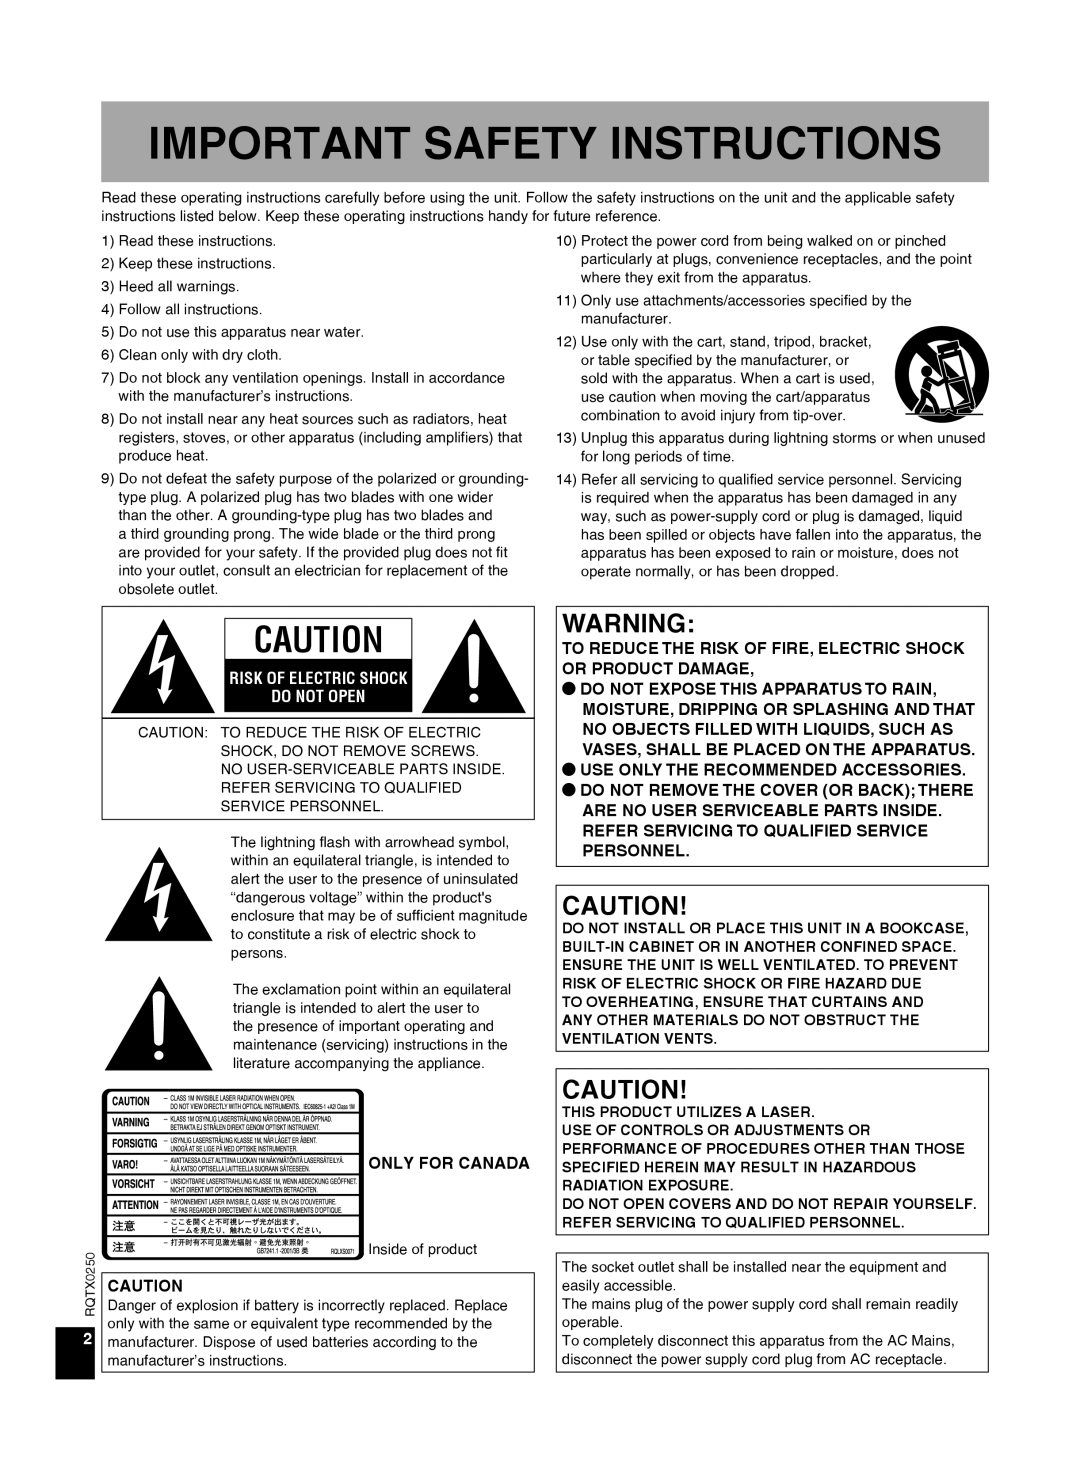 Panasonic SC-HC3 operating instructions Risk Of Electric Shock Do Not Open, Important Safety Instructions 